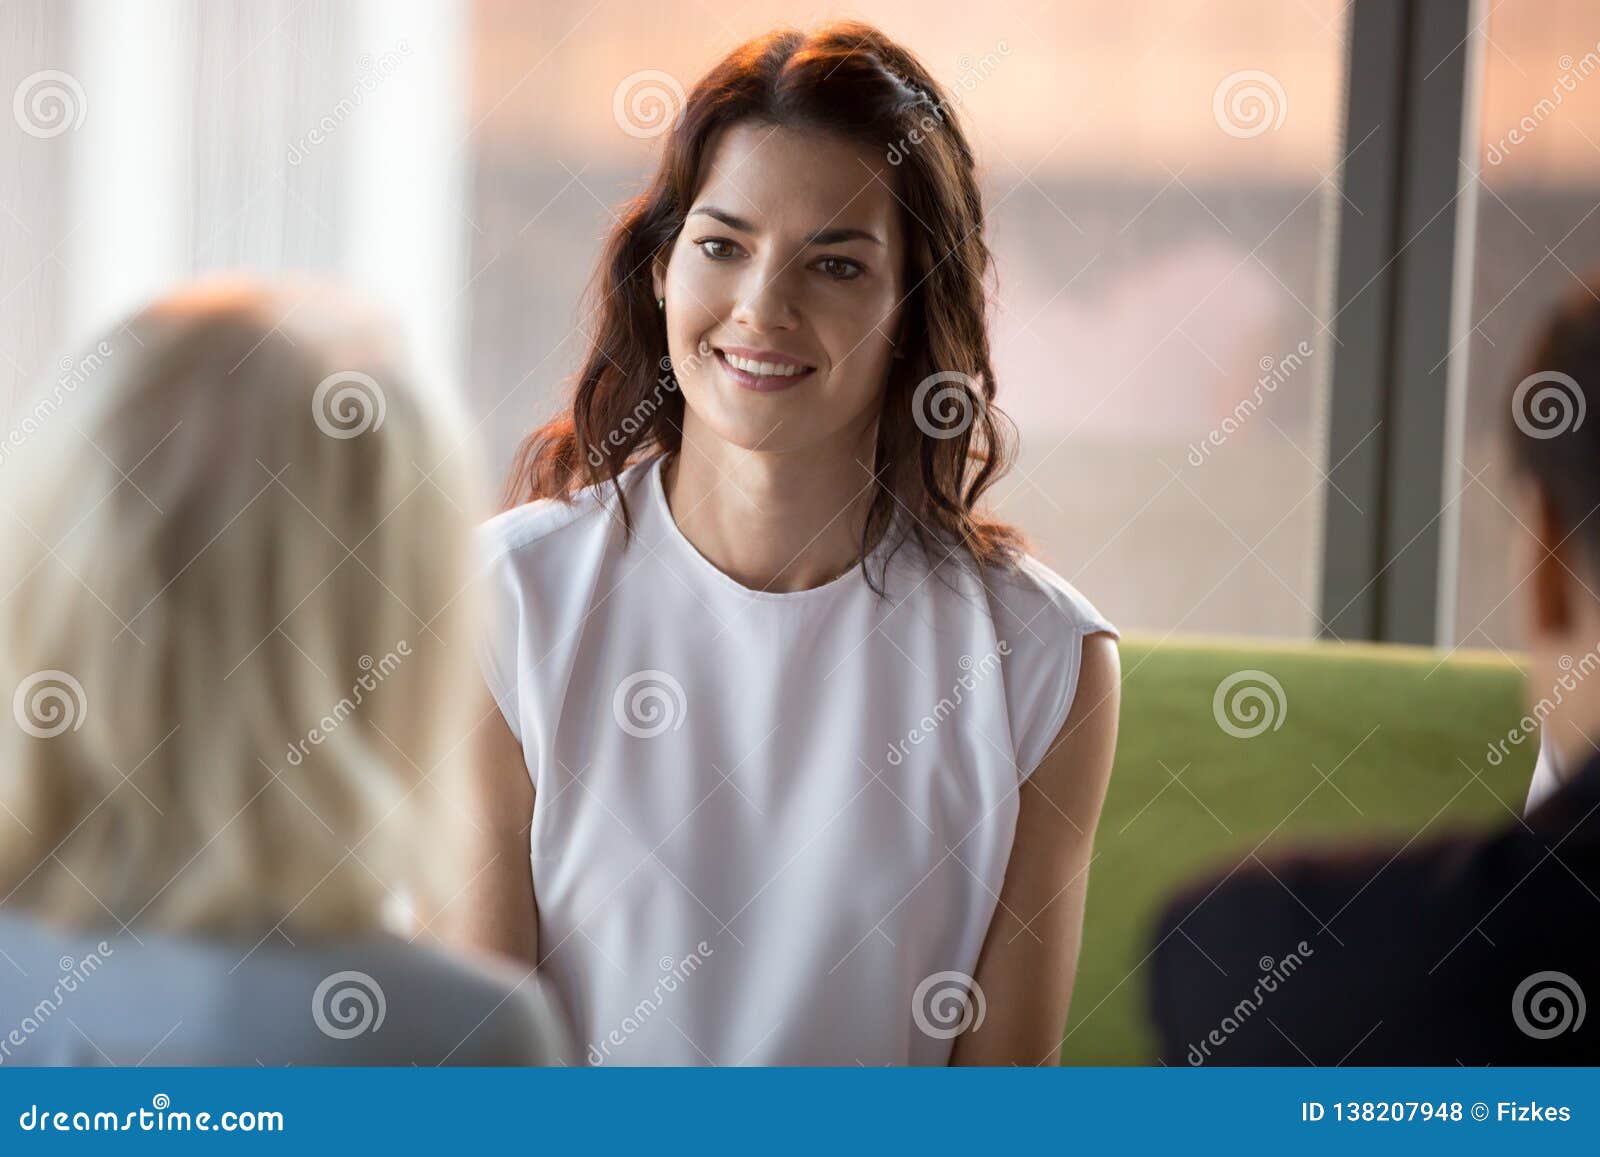 confident happy applicant smiling looking at hr during job interview